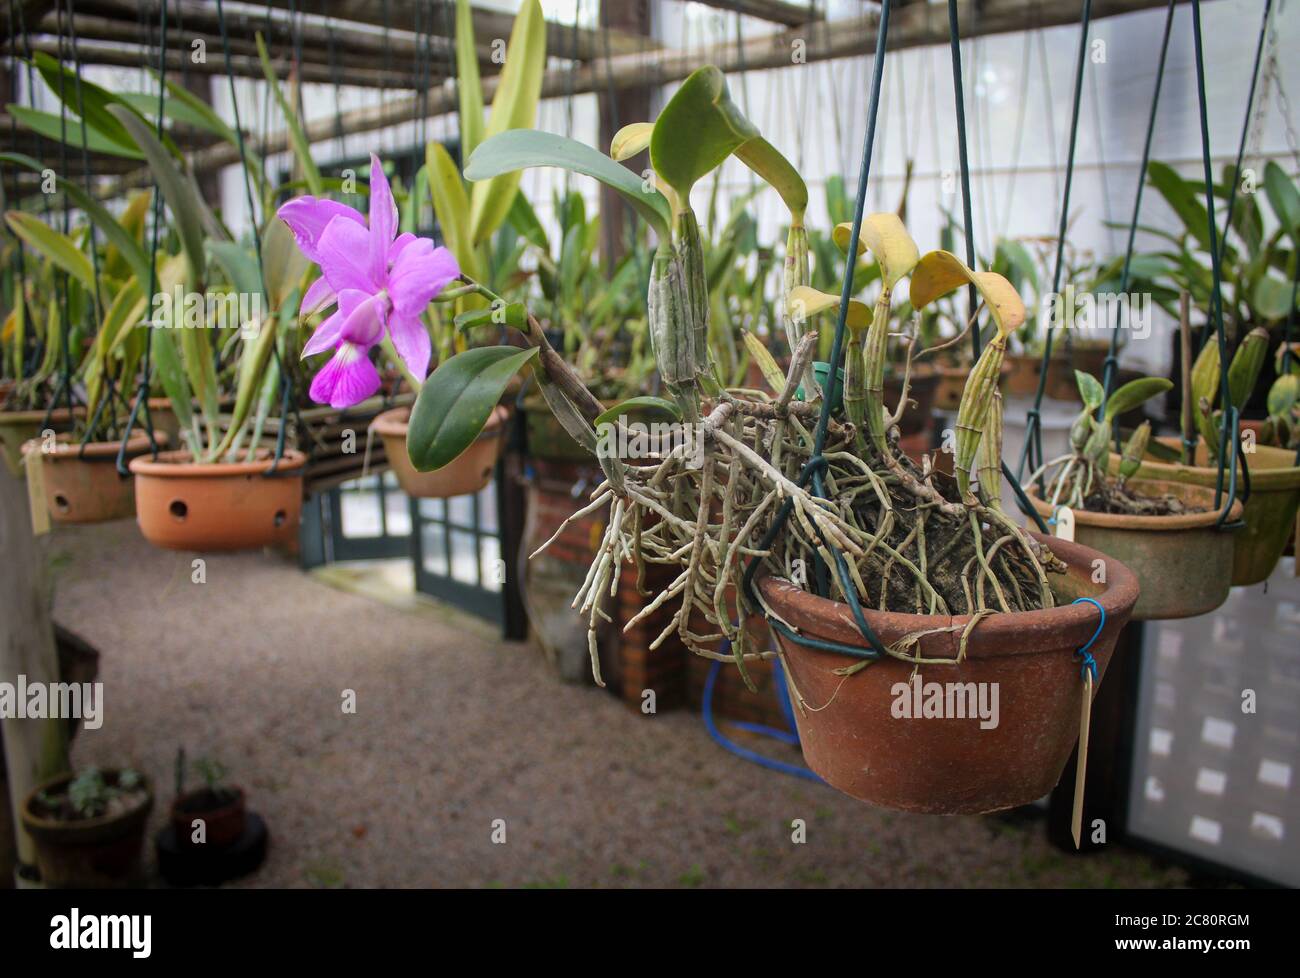 cattleya loddigesii Lindi, orchidaceae. Beautiful pink orchid in a suspended pot Stock Photo